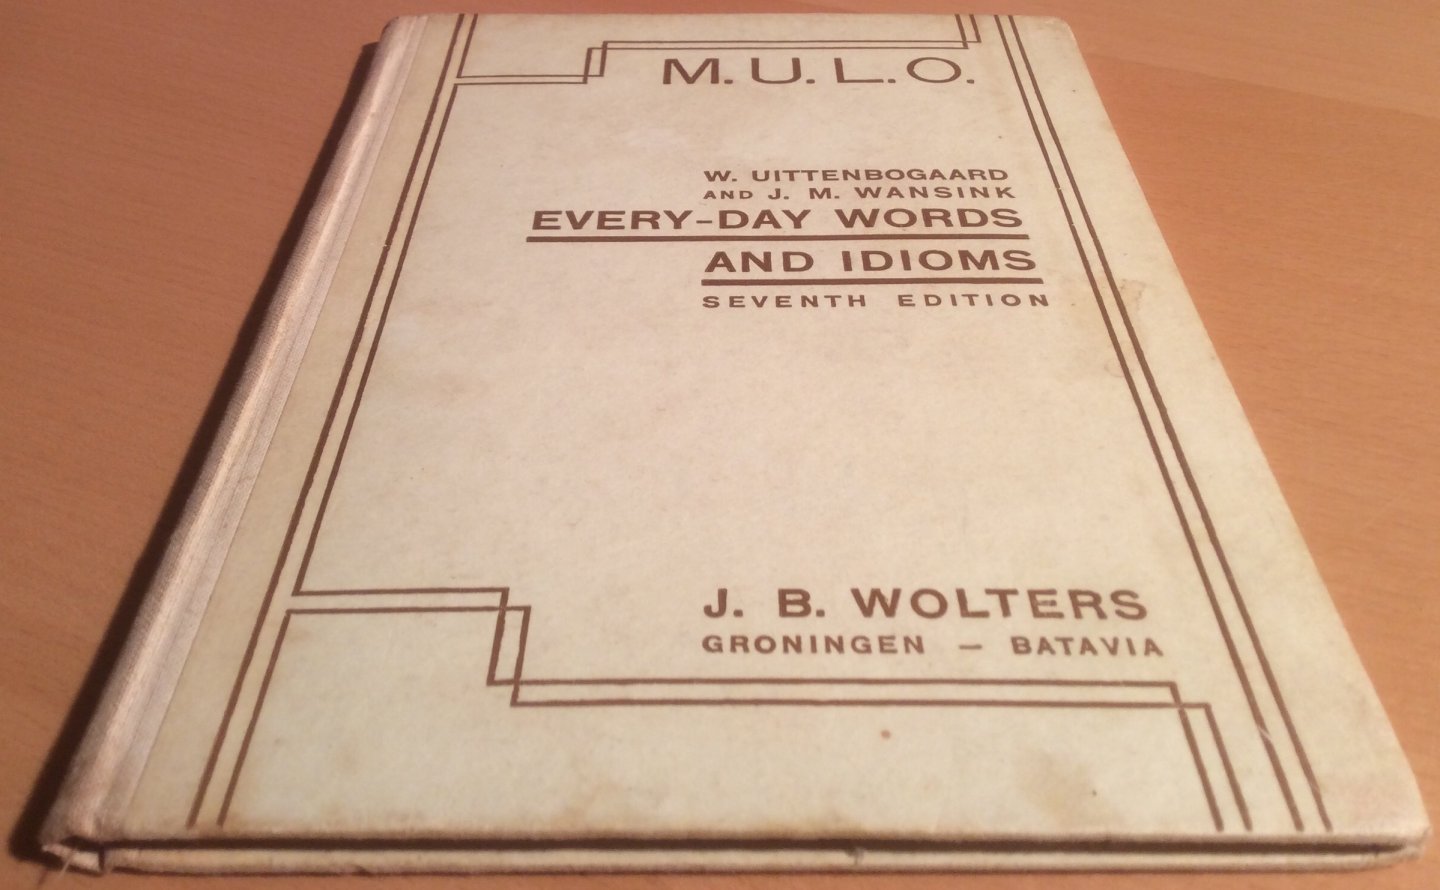 Uittenbogaard, - Every days Words and Idioms. M.U.L.O.